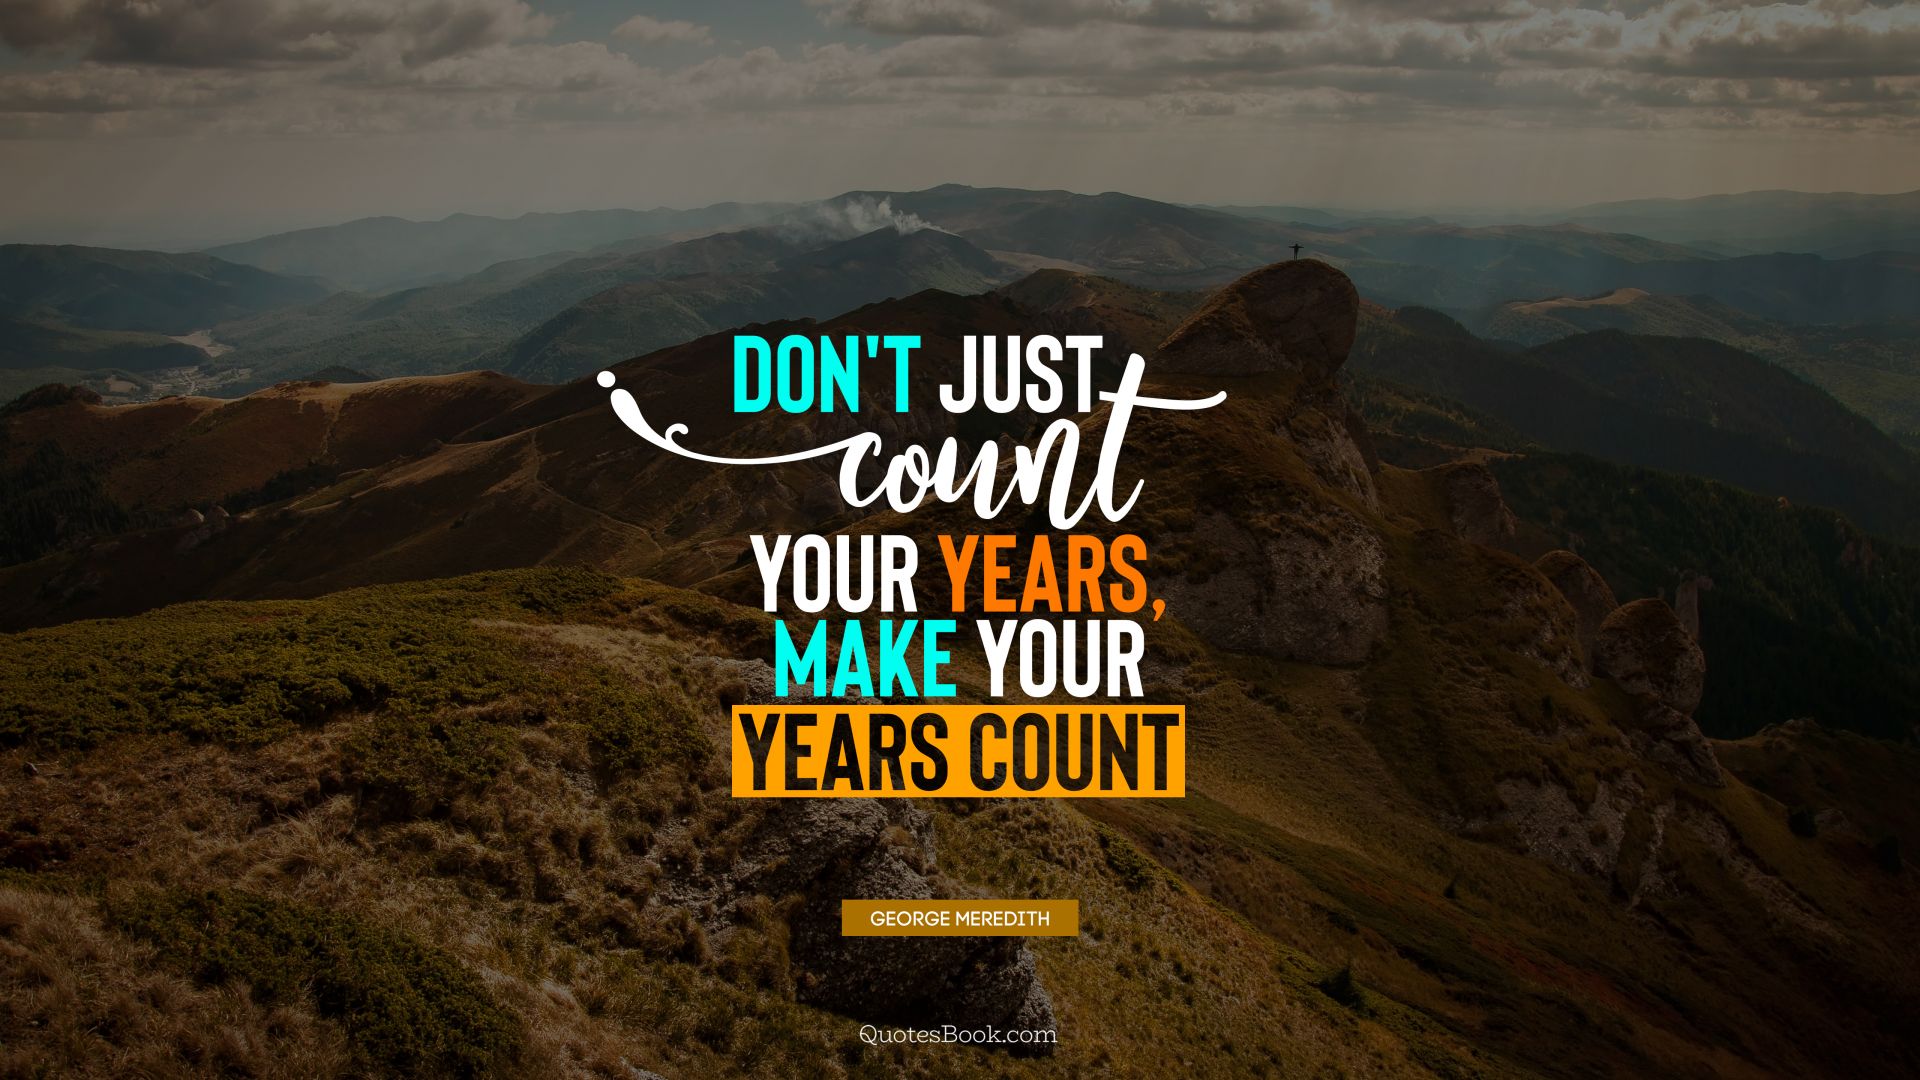 Don't just count your years, make your years count. - Quote by George Meredith